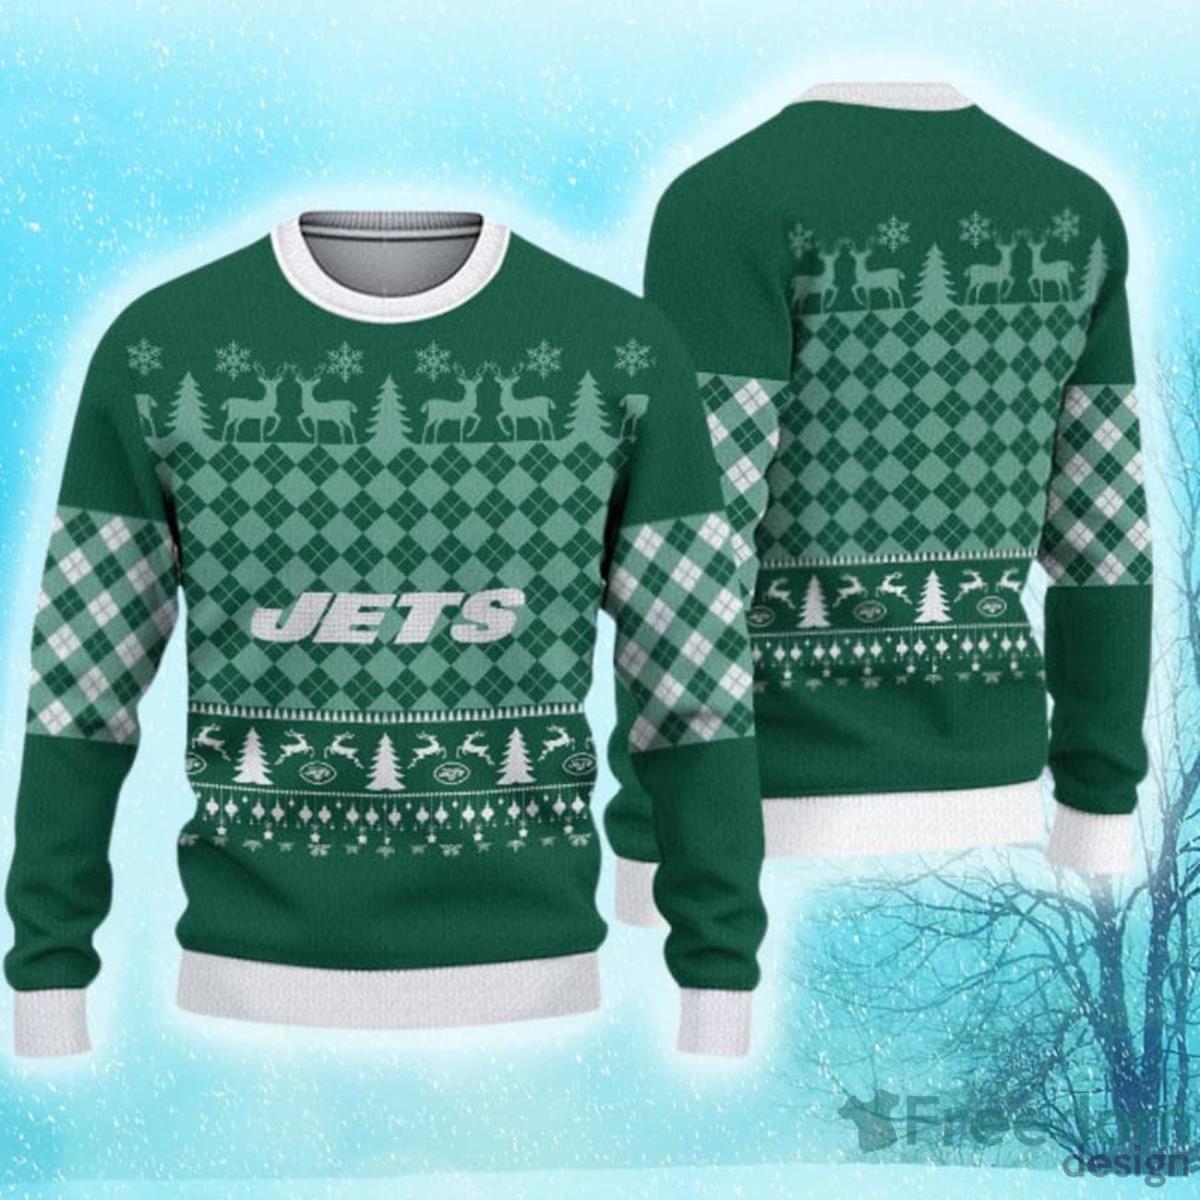 Merry Christmas Jets Fans 🎄 Jets Christmas jersey concept from